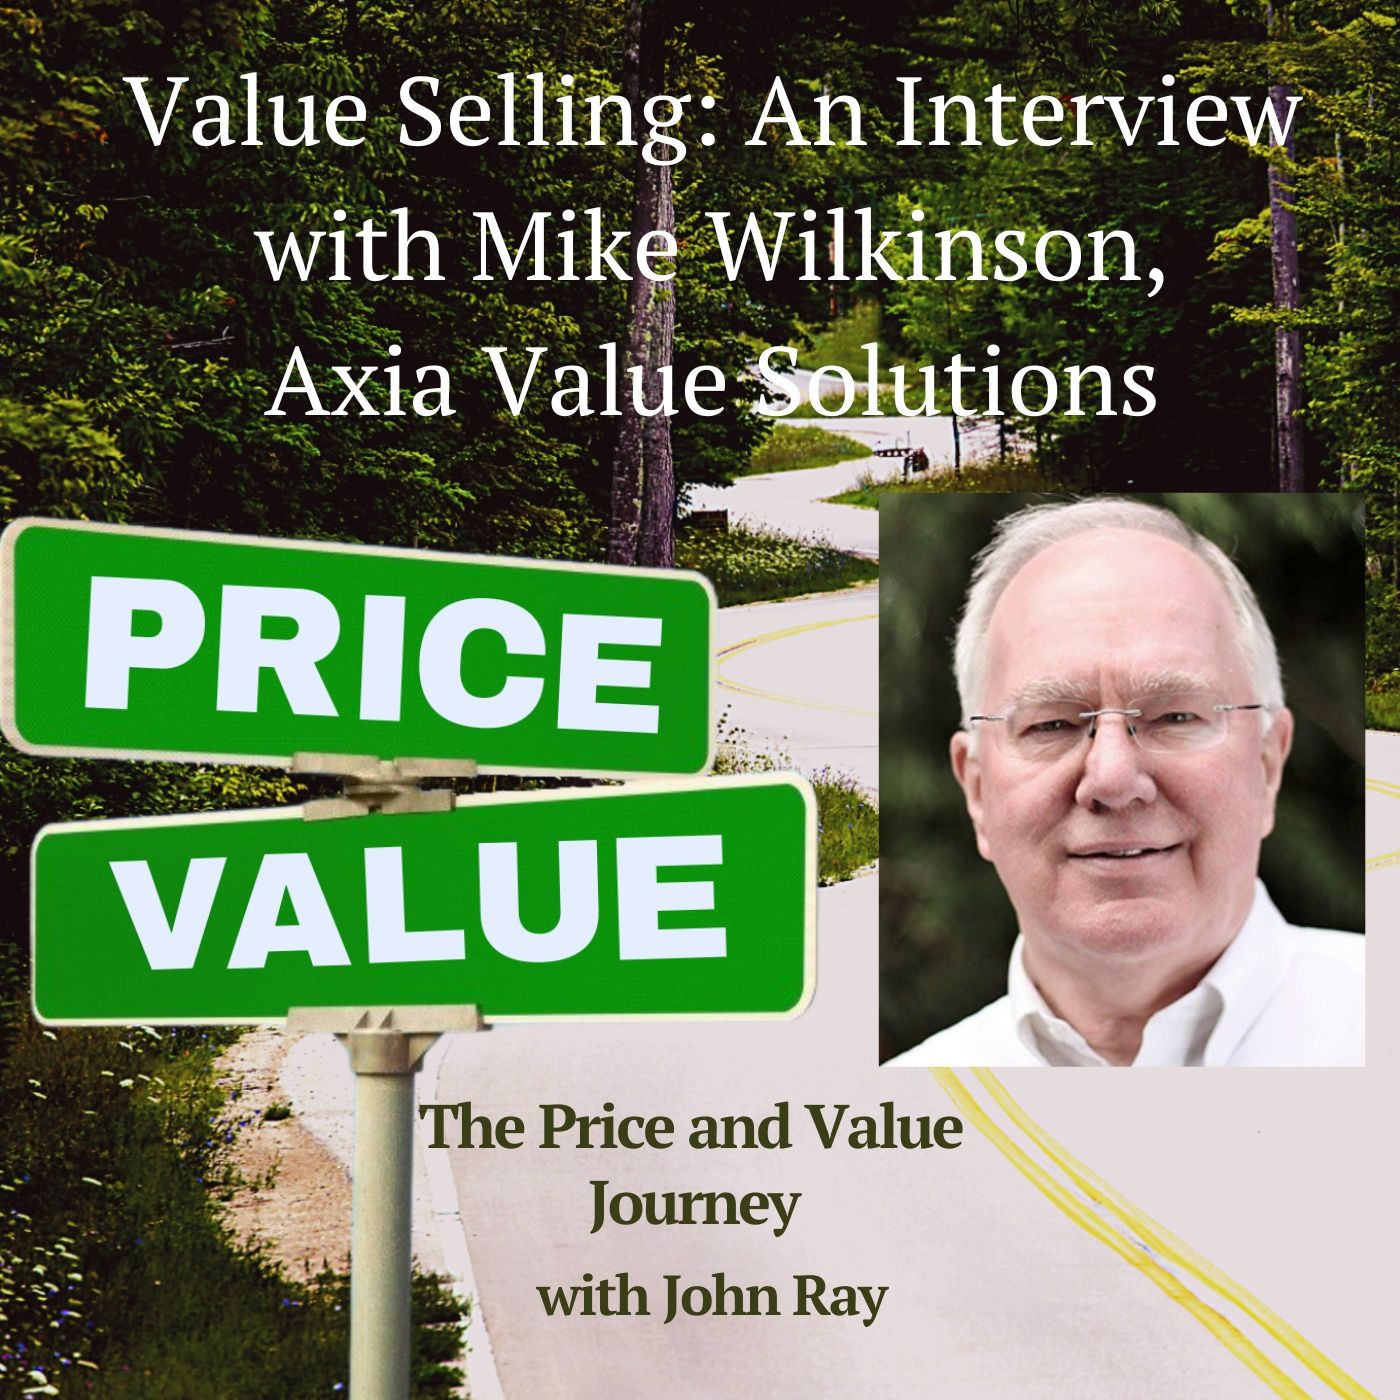 Value Selling: An Interview with Mike Wilkinson, Axia Value Solutions